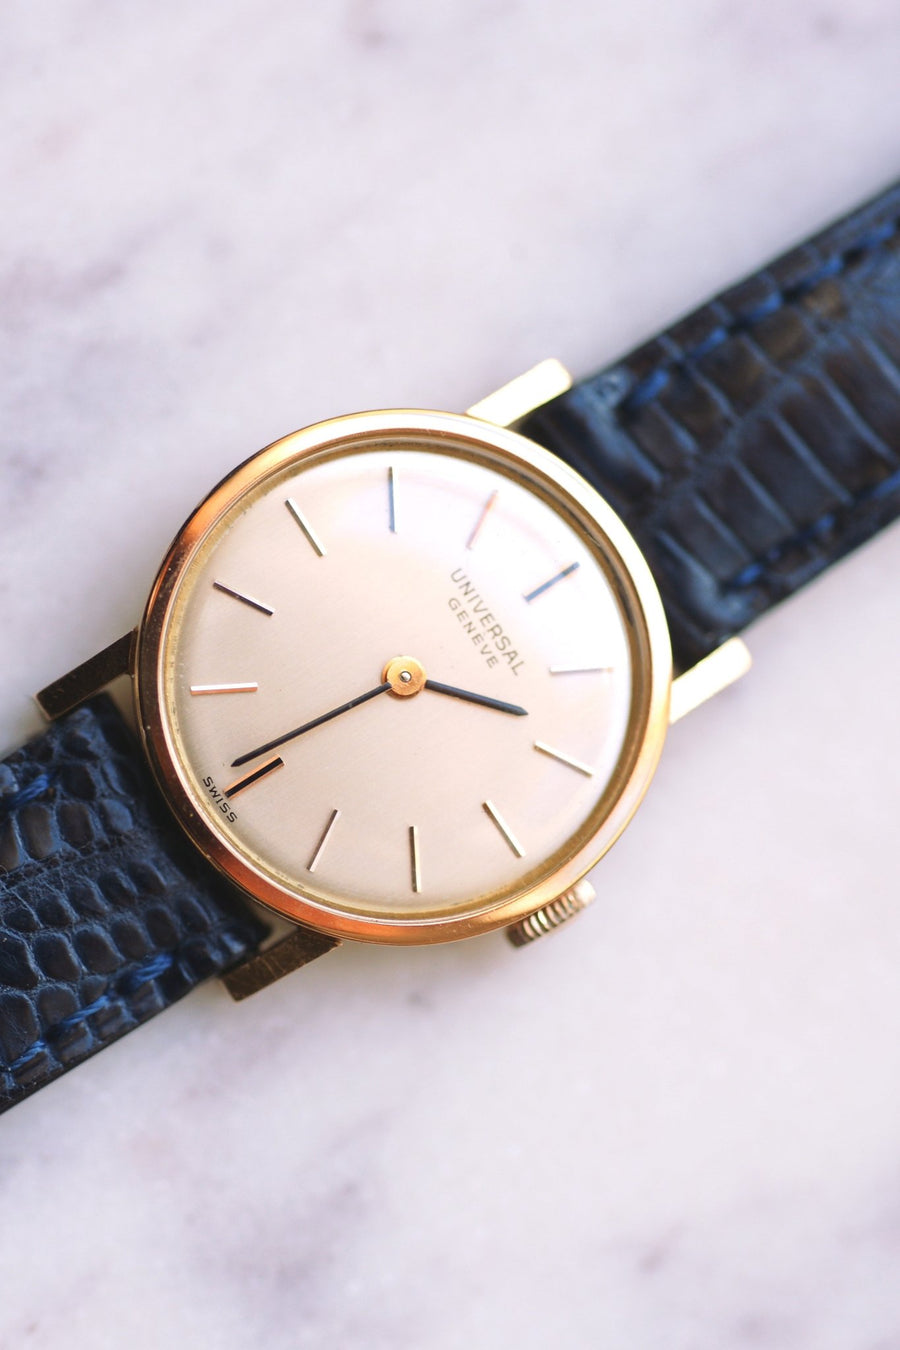 Universal lady's vintage watch in pink gold, mechanical, 70ies - Galerie Pénélope